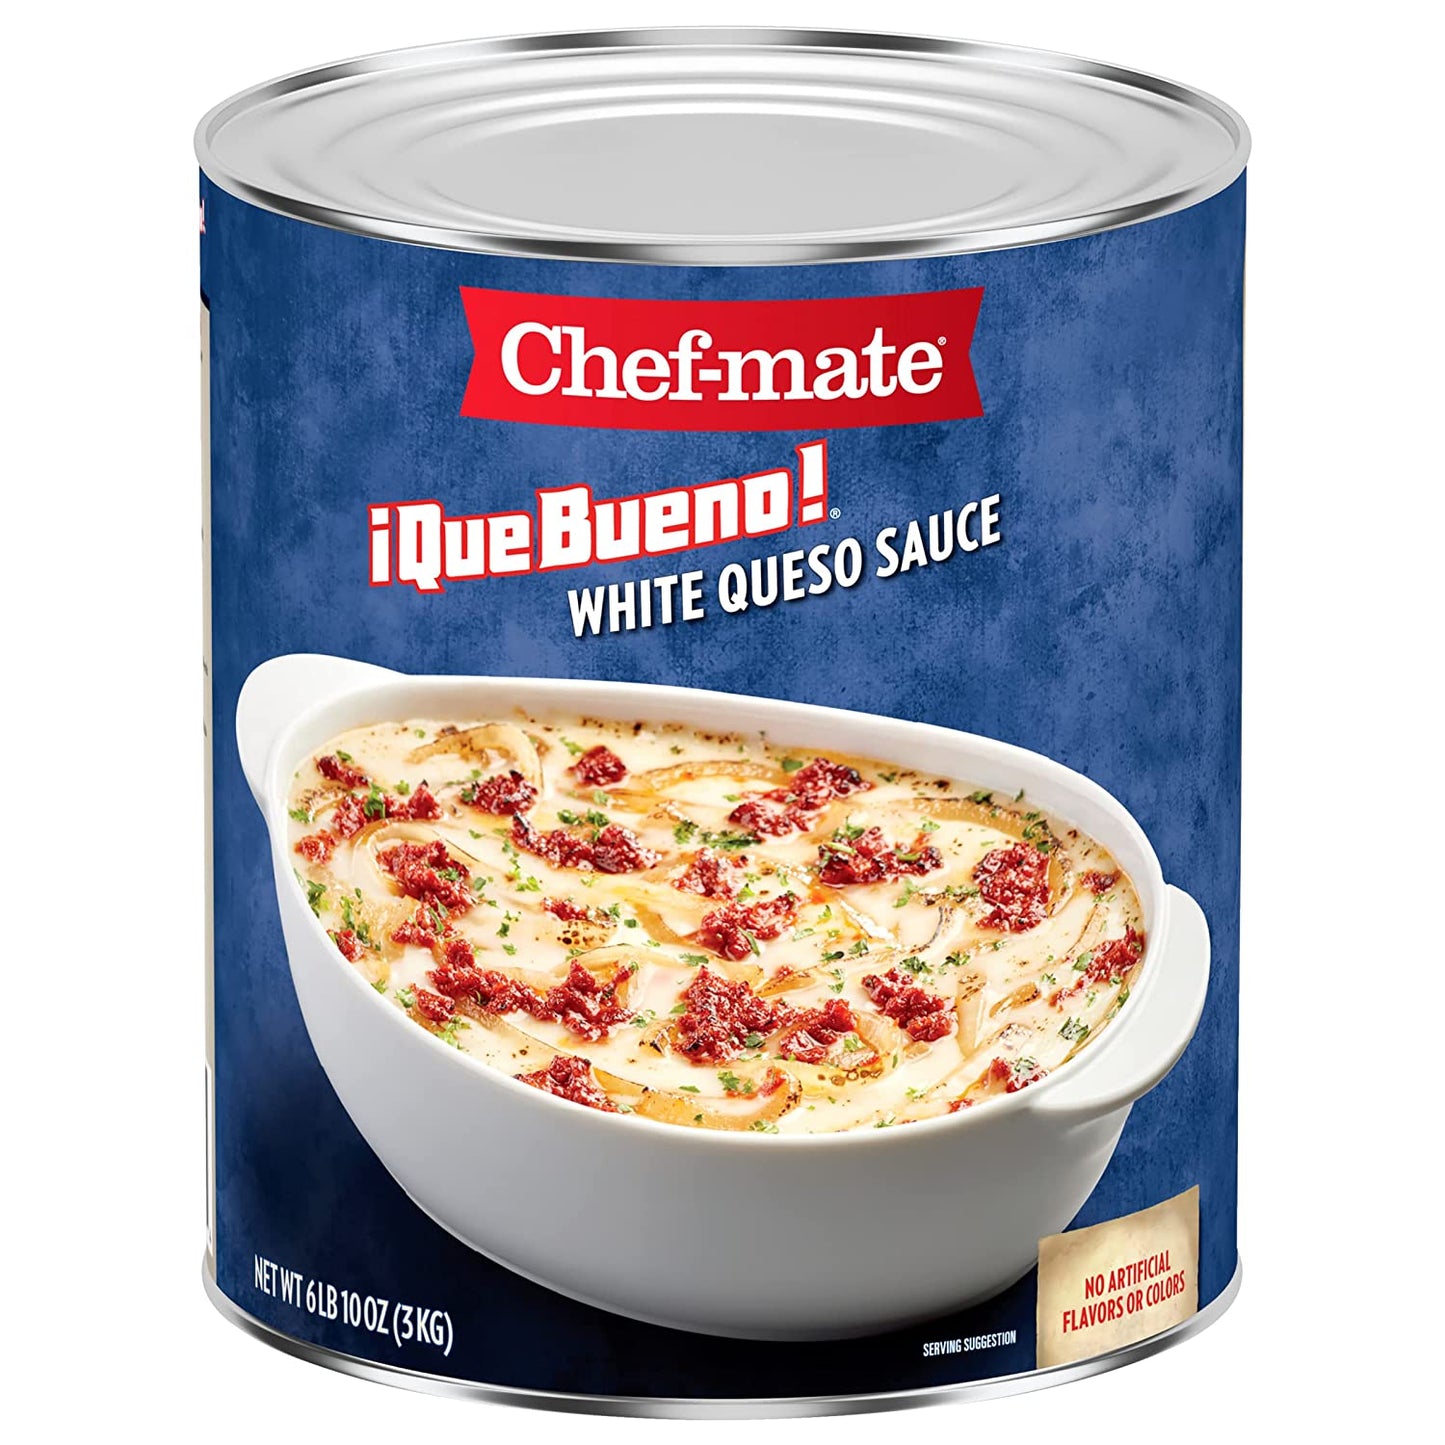 Chef-mate Que Bueno White Queso and Nacho Cheese Sauce, Canned Food, 6 lb. 10 oz. Bulk Can